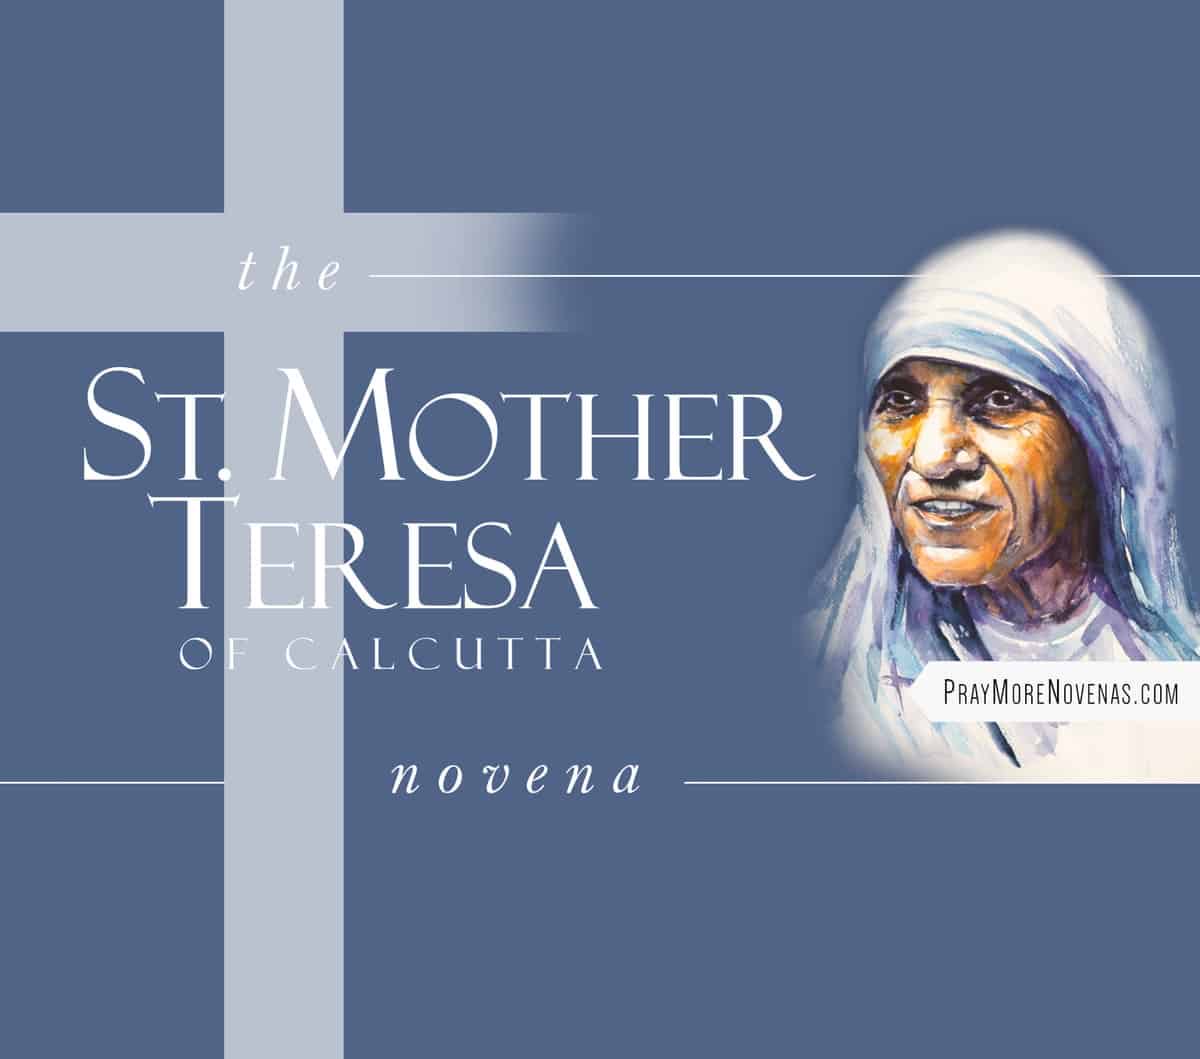 Since her name was invoked, let us pray for the intercession of St. Mother Teresa of Calcutta — and all the saints — to help exonerate this innocent man and begin to heal this country of the deep evil that has overtaken the justice system. 🙏🏻